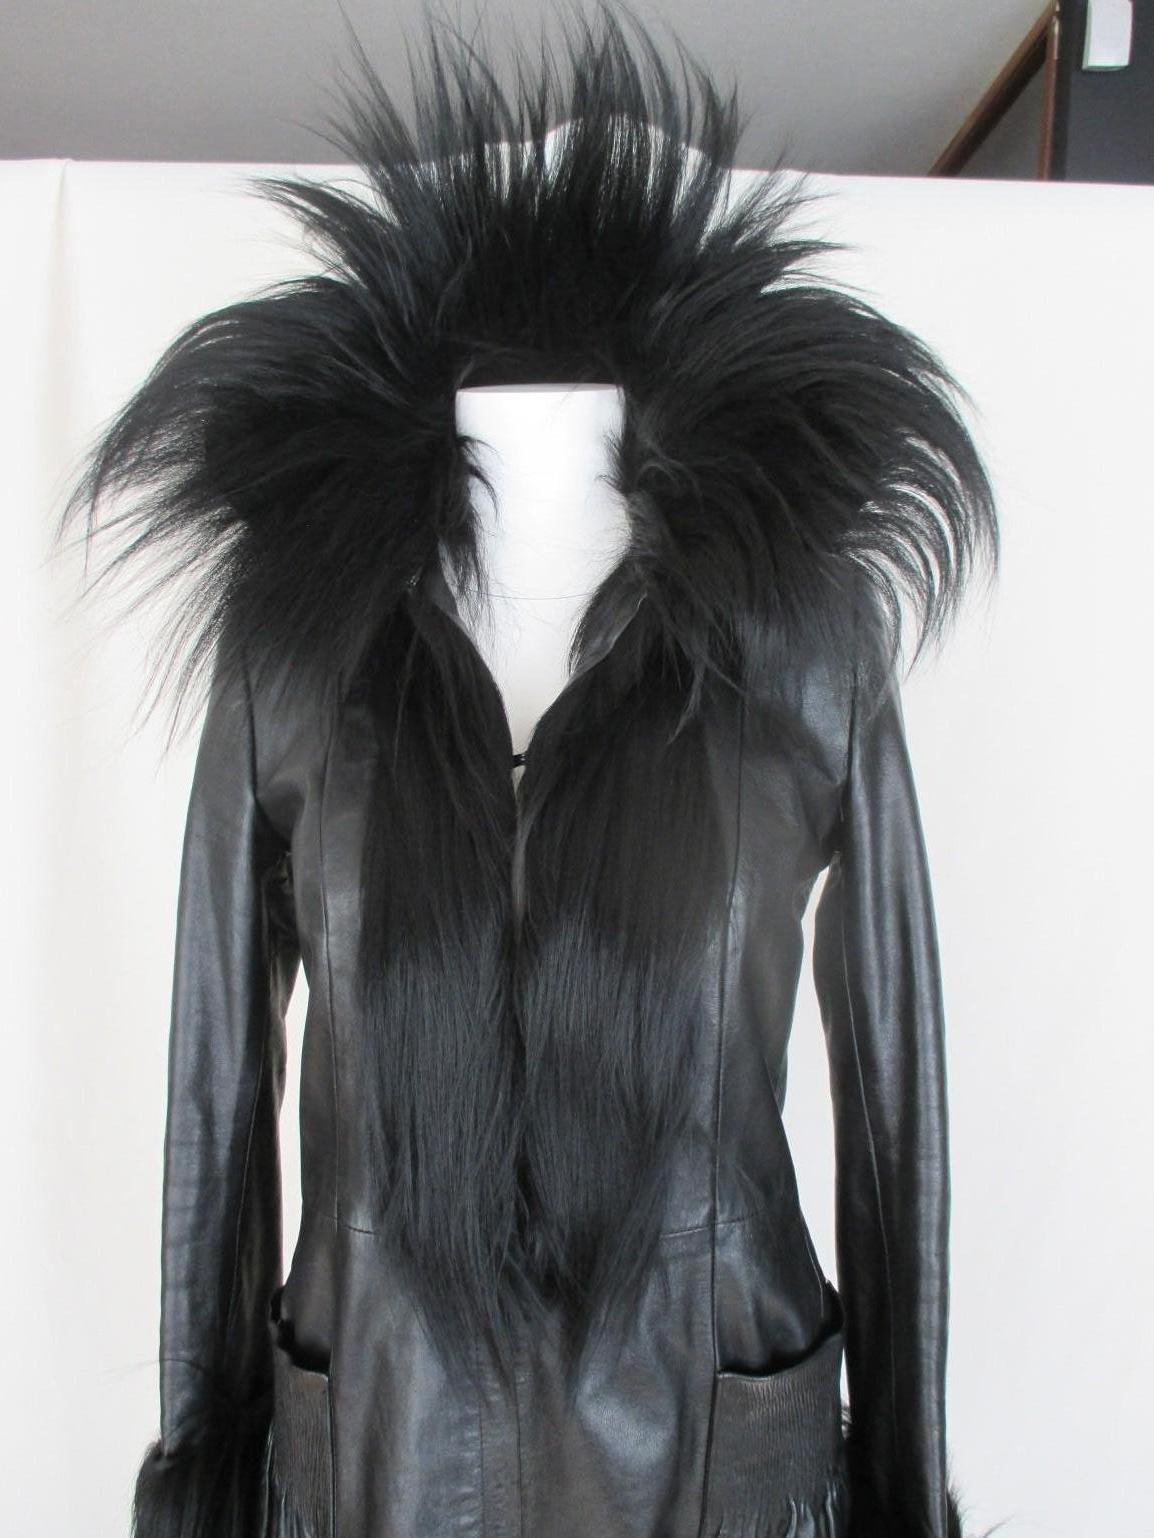 This vintage coat is made from black leather with black yak fur details, has 2 pockets, 1 zipper, 3 closing hooks and narrow sleeves.
Its in pre-loved vintage condition with some wear at the lining.
Size - Small 

Please note that vintage items are